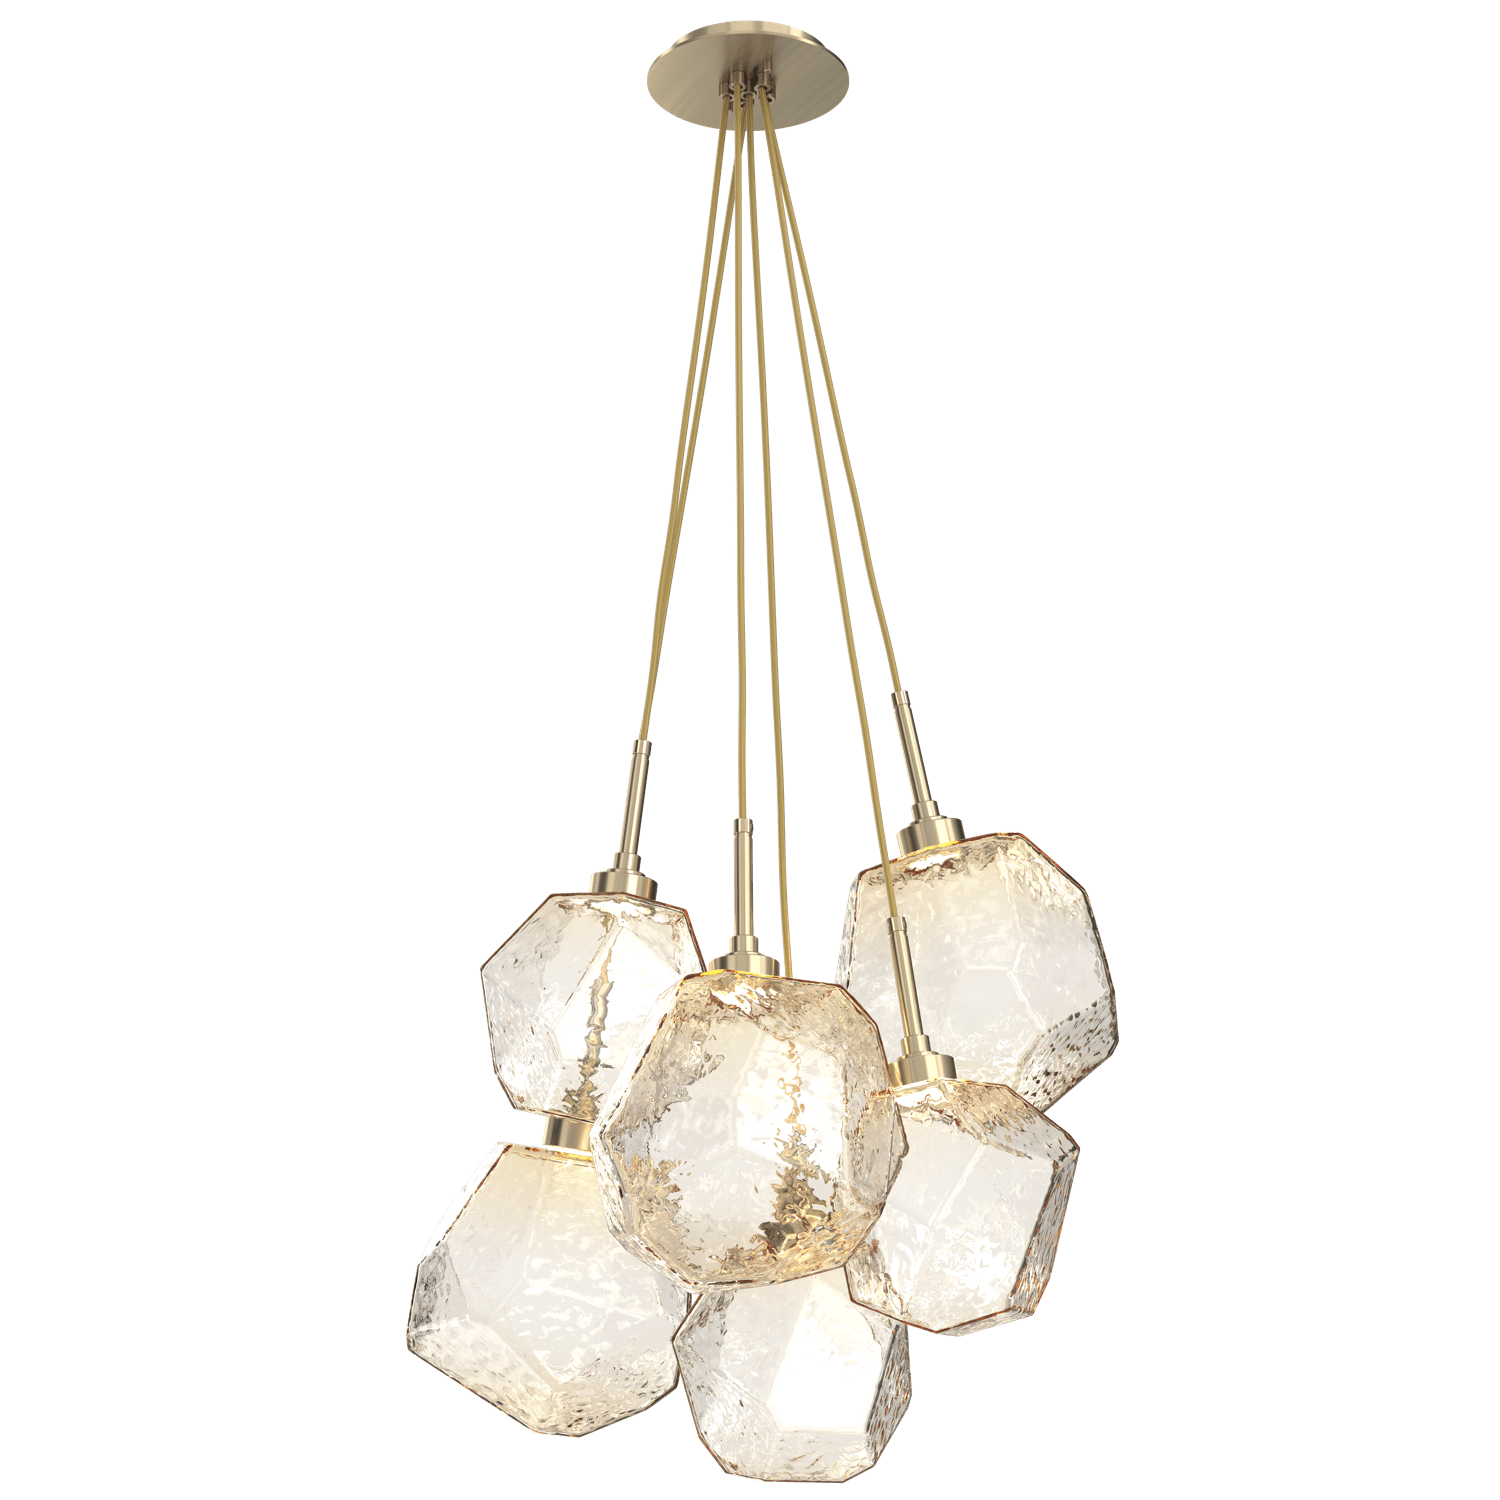 CHB0039-0F-HB-A-Hammerton-Studio-Gem-6-light-cluster-pendant-light-with-heritage-brass-finish-and-amber-blown-glass-shades-and-LED-lamping